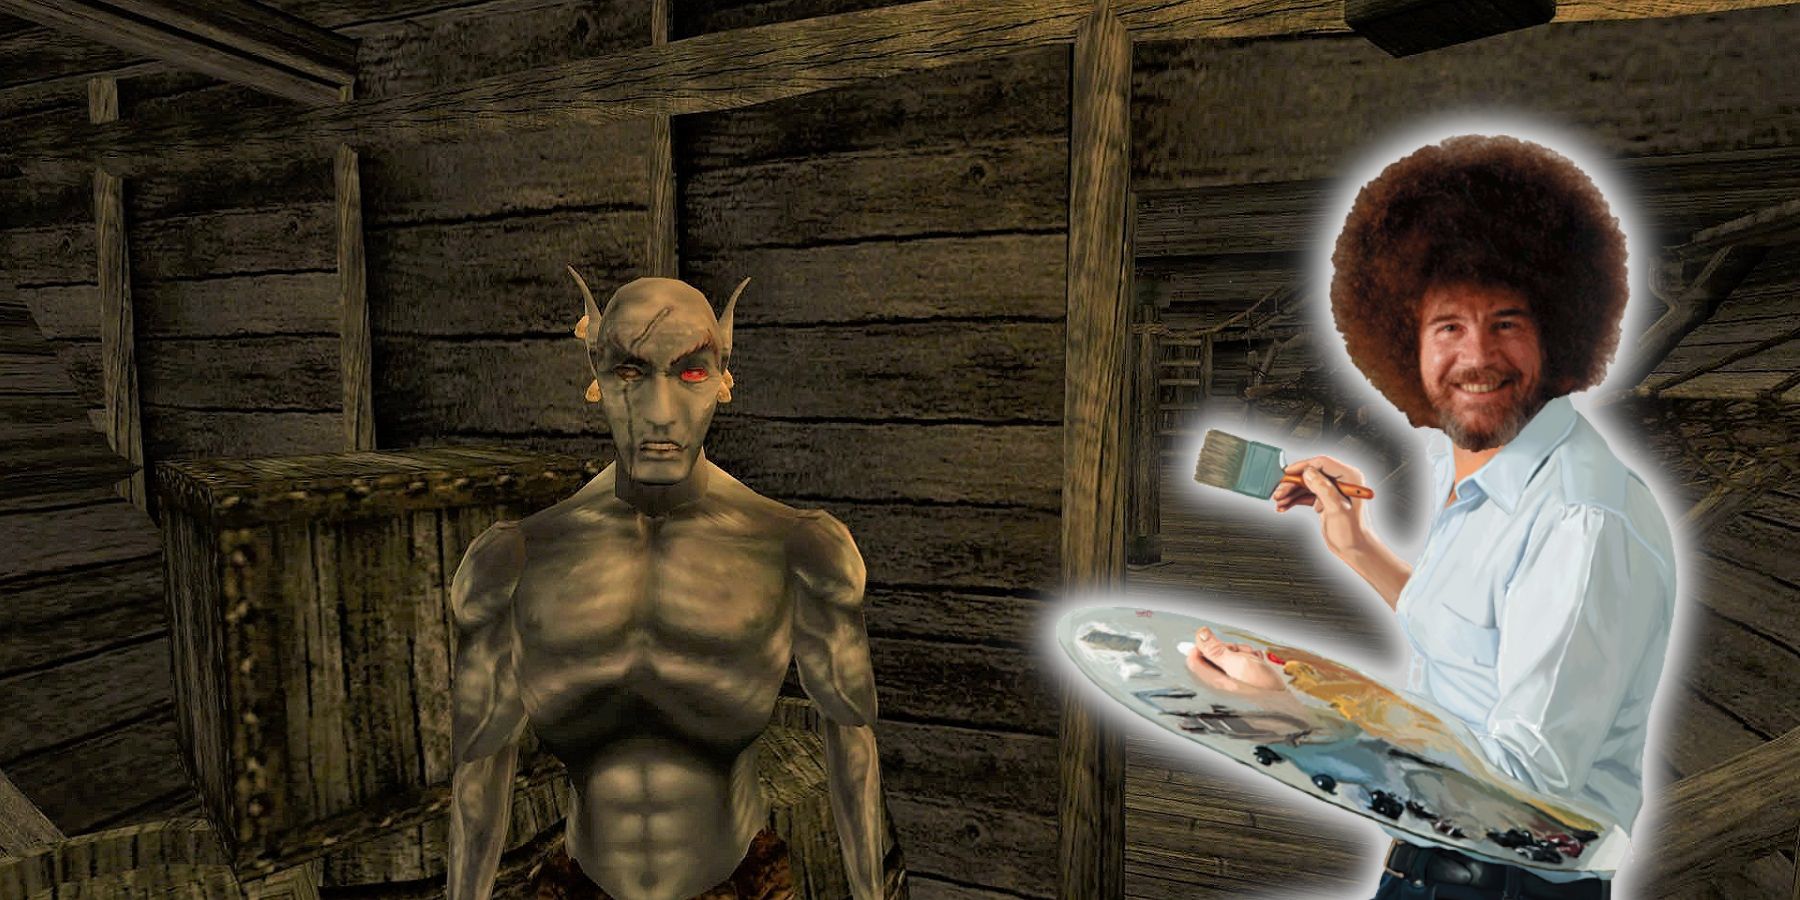 Morrowind Mod Allows Players to Unleash Their Inner Bob
Ross